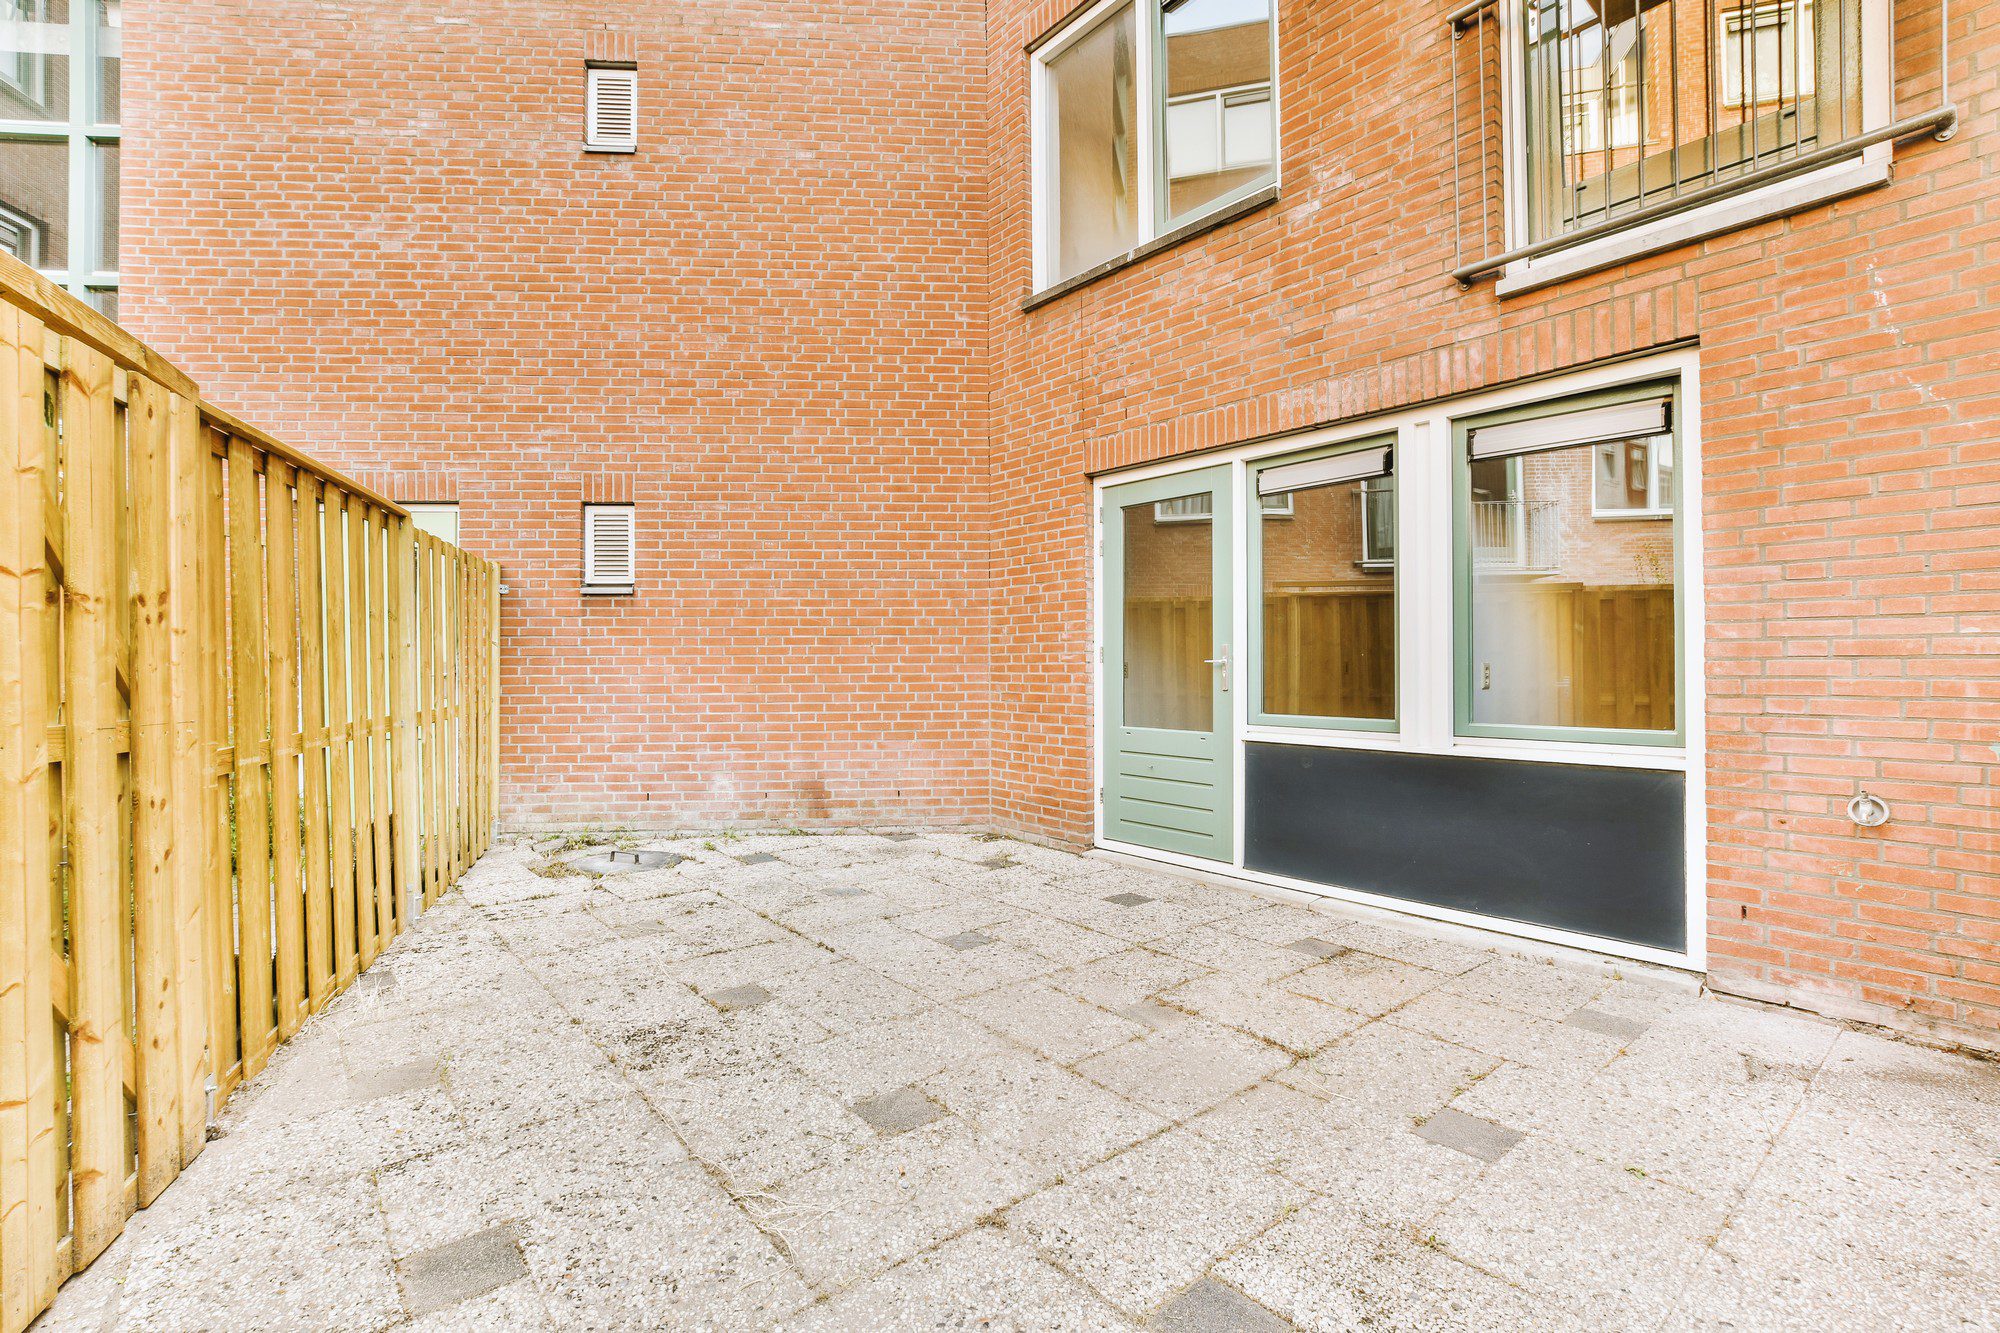 The image shows an outdoor area with a paved floor, which looks like a small courtyard or a back alley of a residential or commercial building. There is a red brick wall with several windows and a narrow, small window that seems to have vents, possibly for air exchange. On the left, there is a wooden fence that appears to be the boundary for the area.On the ground level of the brick wall, there's an entrance consisting of a light-coloured door flanked by two tall windows, which are fitted with reflective glass. Above this entrance, there is a barred window for security or safety. This setup suggests the image might be from the back of the building or a less public facing area, possibly designed for privacy and functionality rather than aesthetic appeal.The overall appearance suggests a modern, utilitarian design possibly found in urban or suburban areas. The space could serve as a small private outdoor area for residents or employees, or possibly as a service entrance.